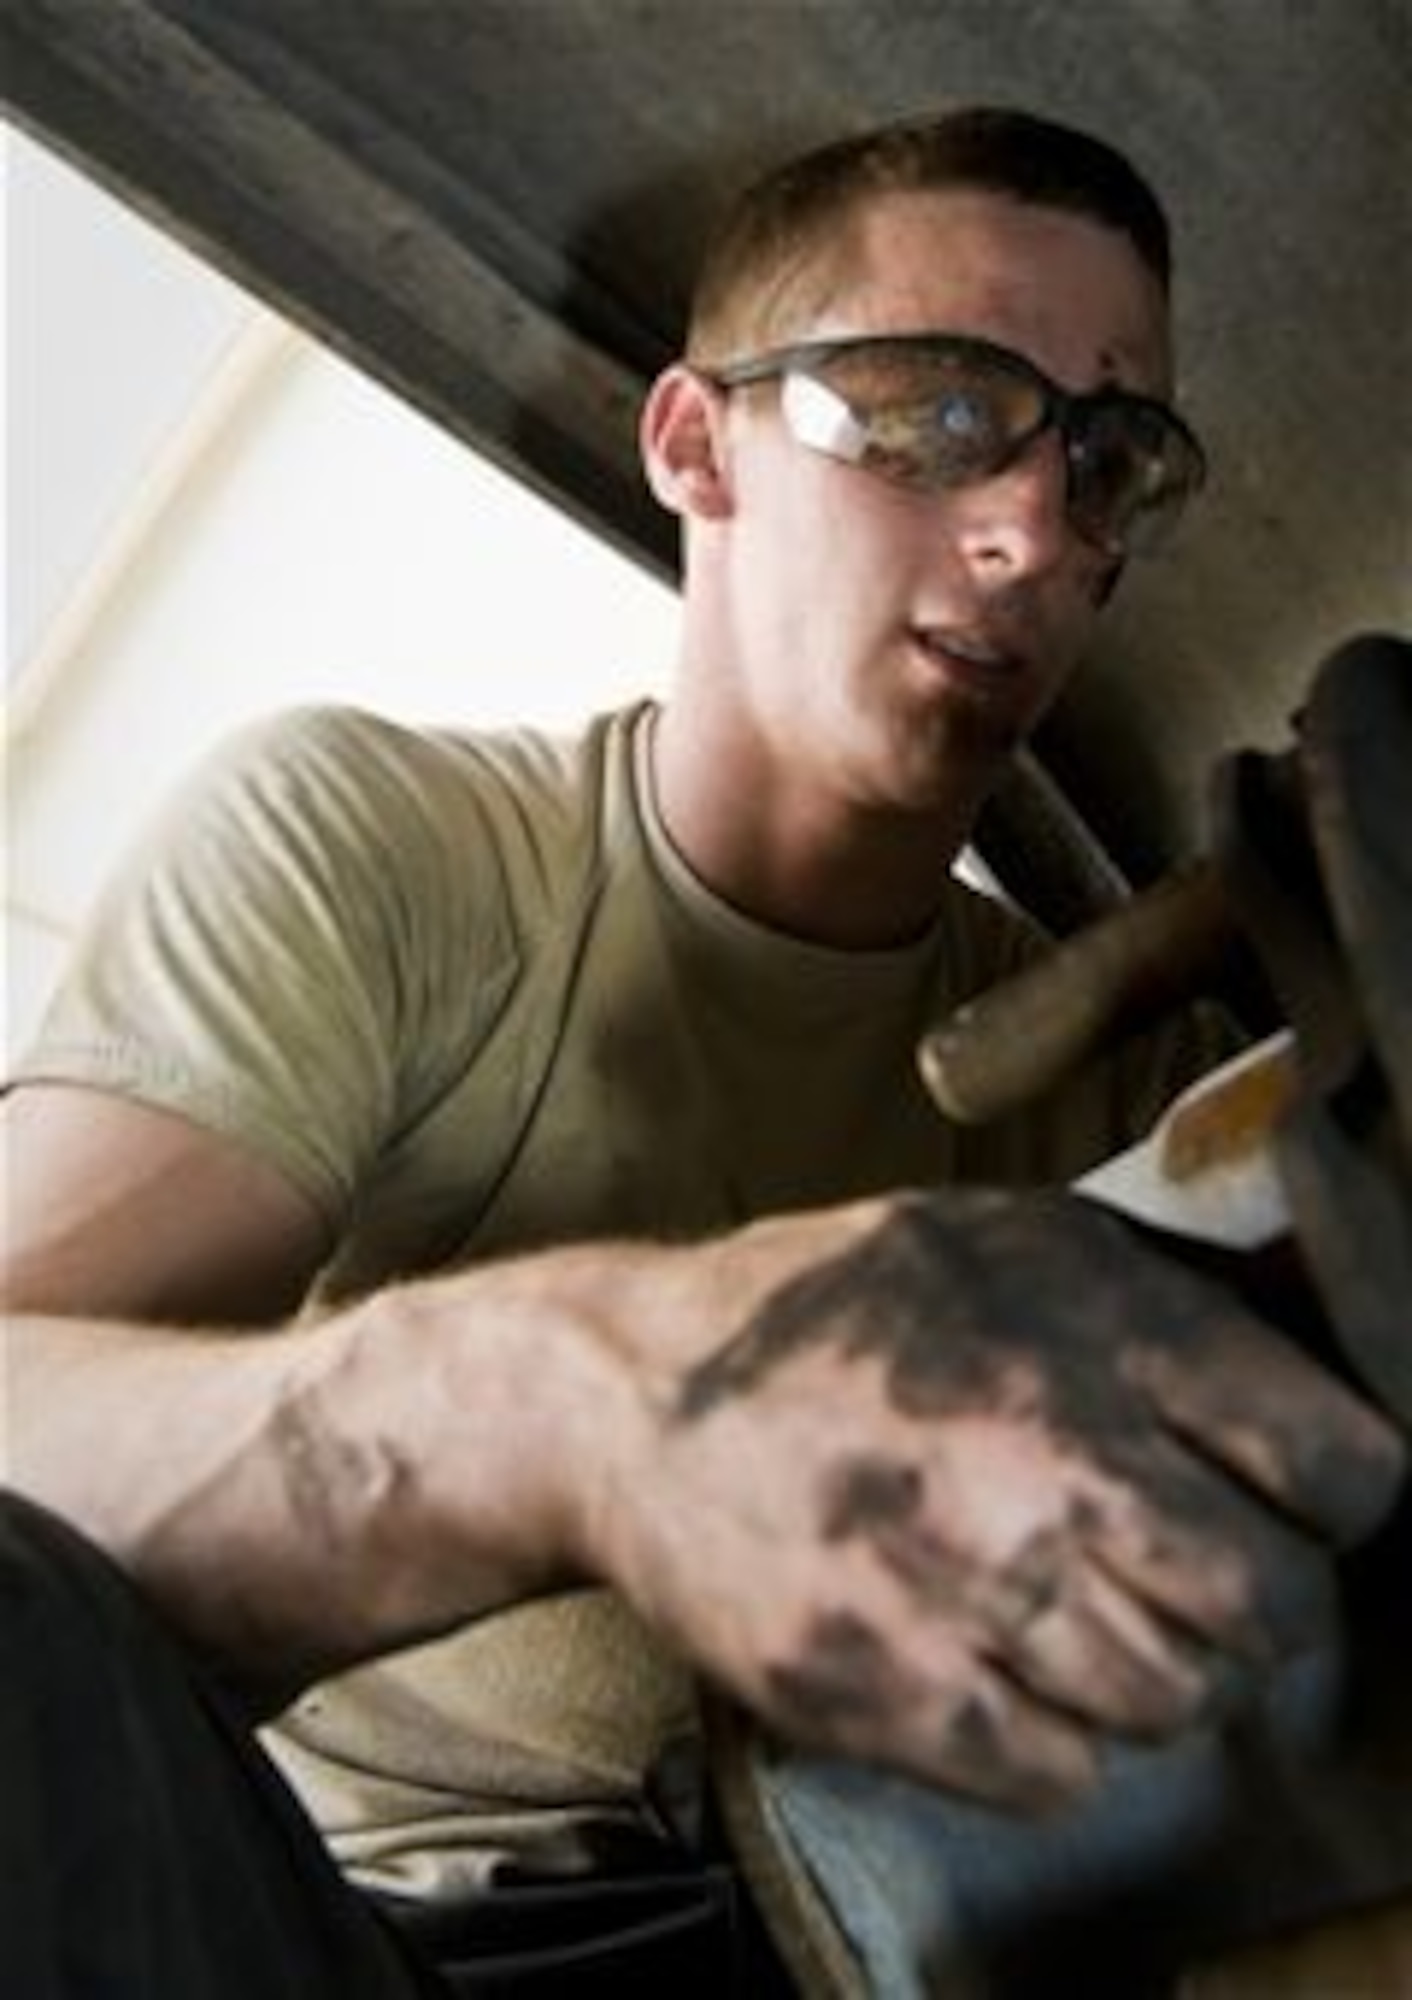 Senior Airman Dustin Franklin works on the brakes of a shuttle bus at the 379th Air Expeditionary Wing in Southwest Asia, July 31, 2013. Franklin is a 379th Expeditionary Logistics Readiness Squadron vehicle mechanic deployed from Eglin Air Force Base, Fla. (U.S. Air Force photo/Senior Airman Benjamin Stratton)